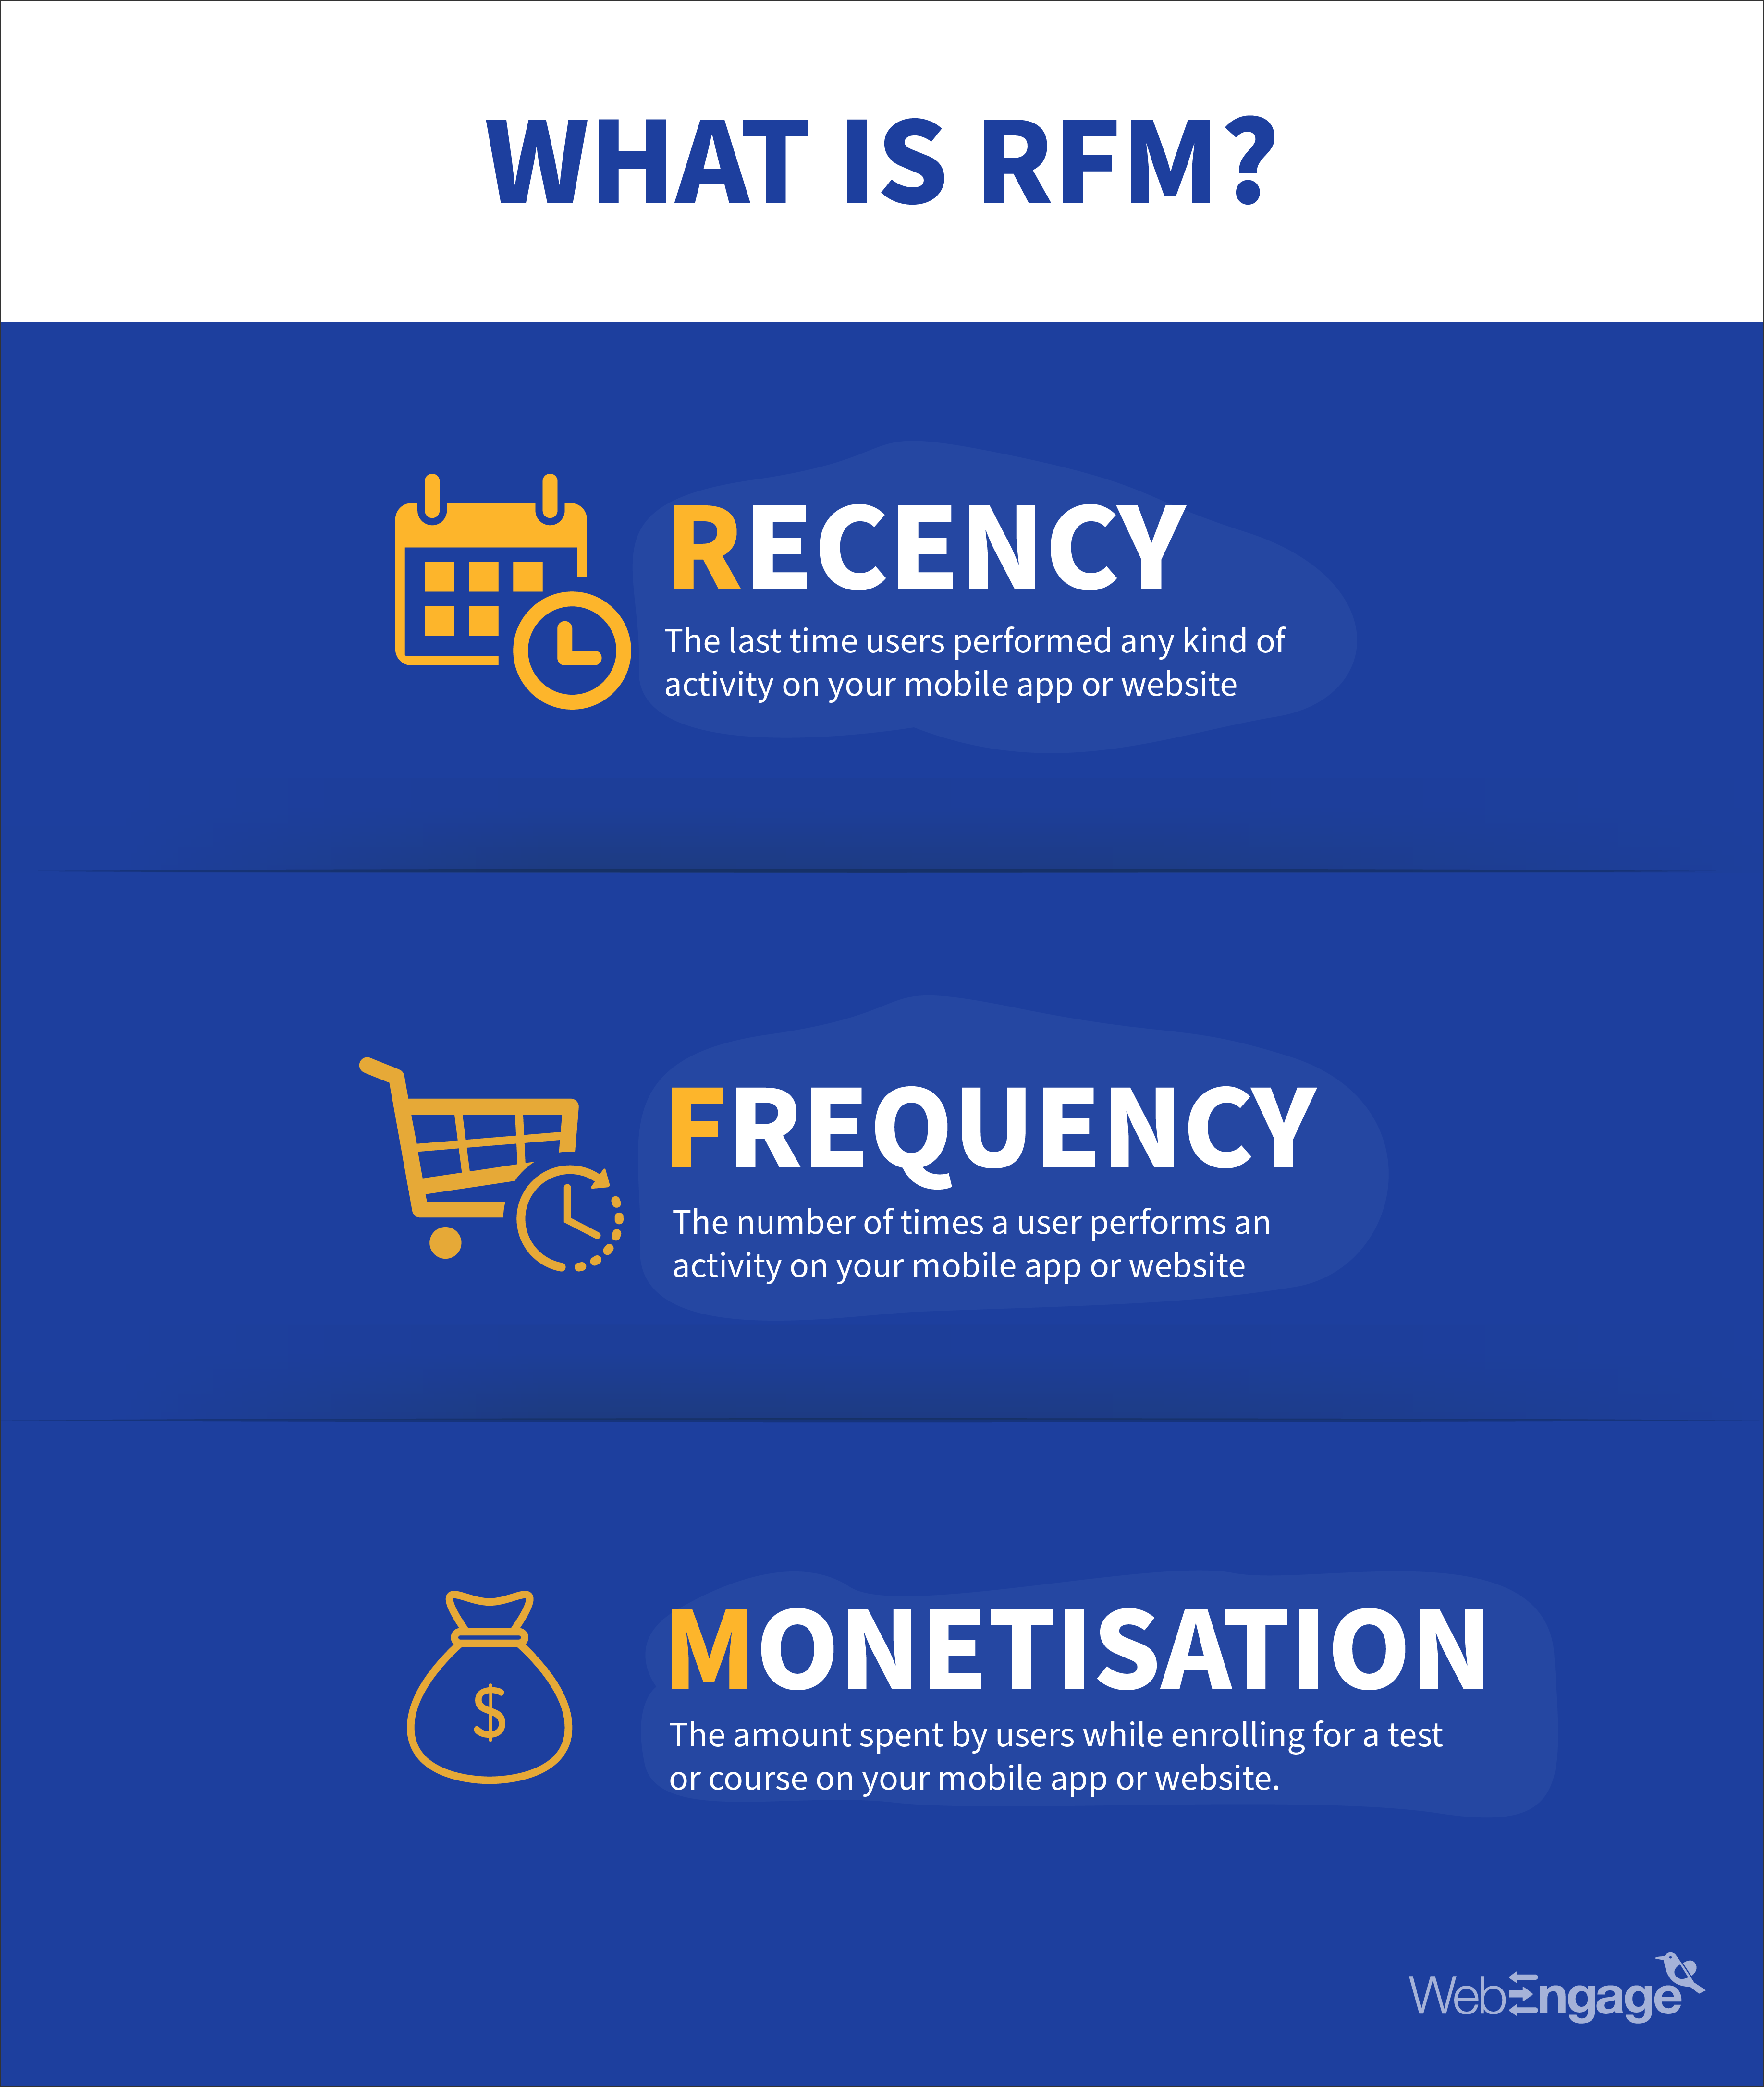 What is RFM?